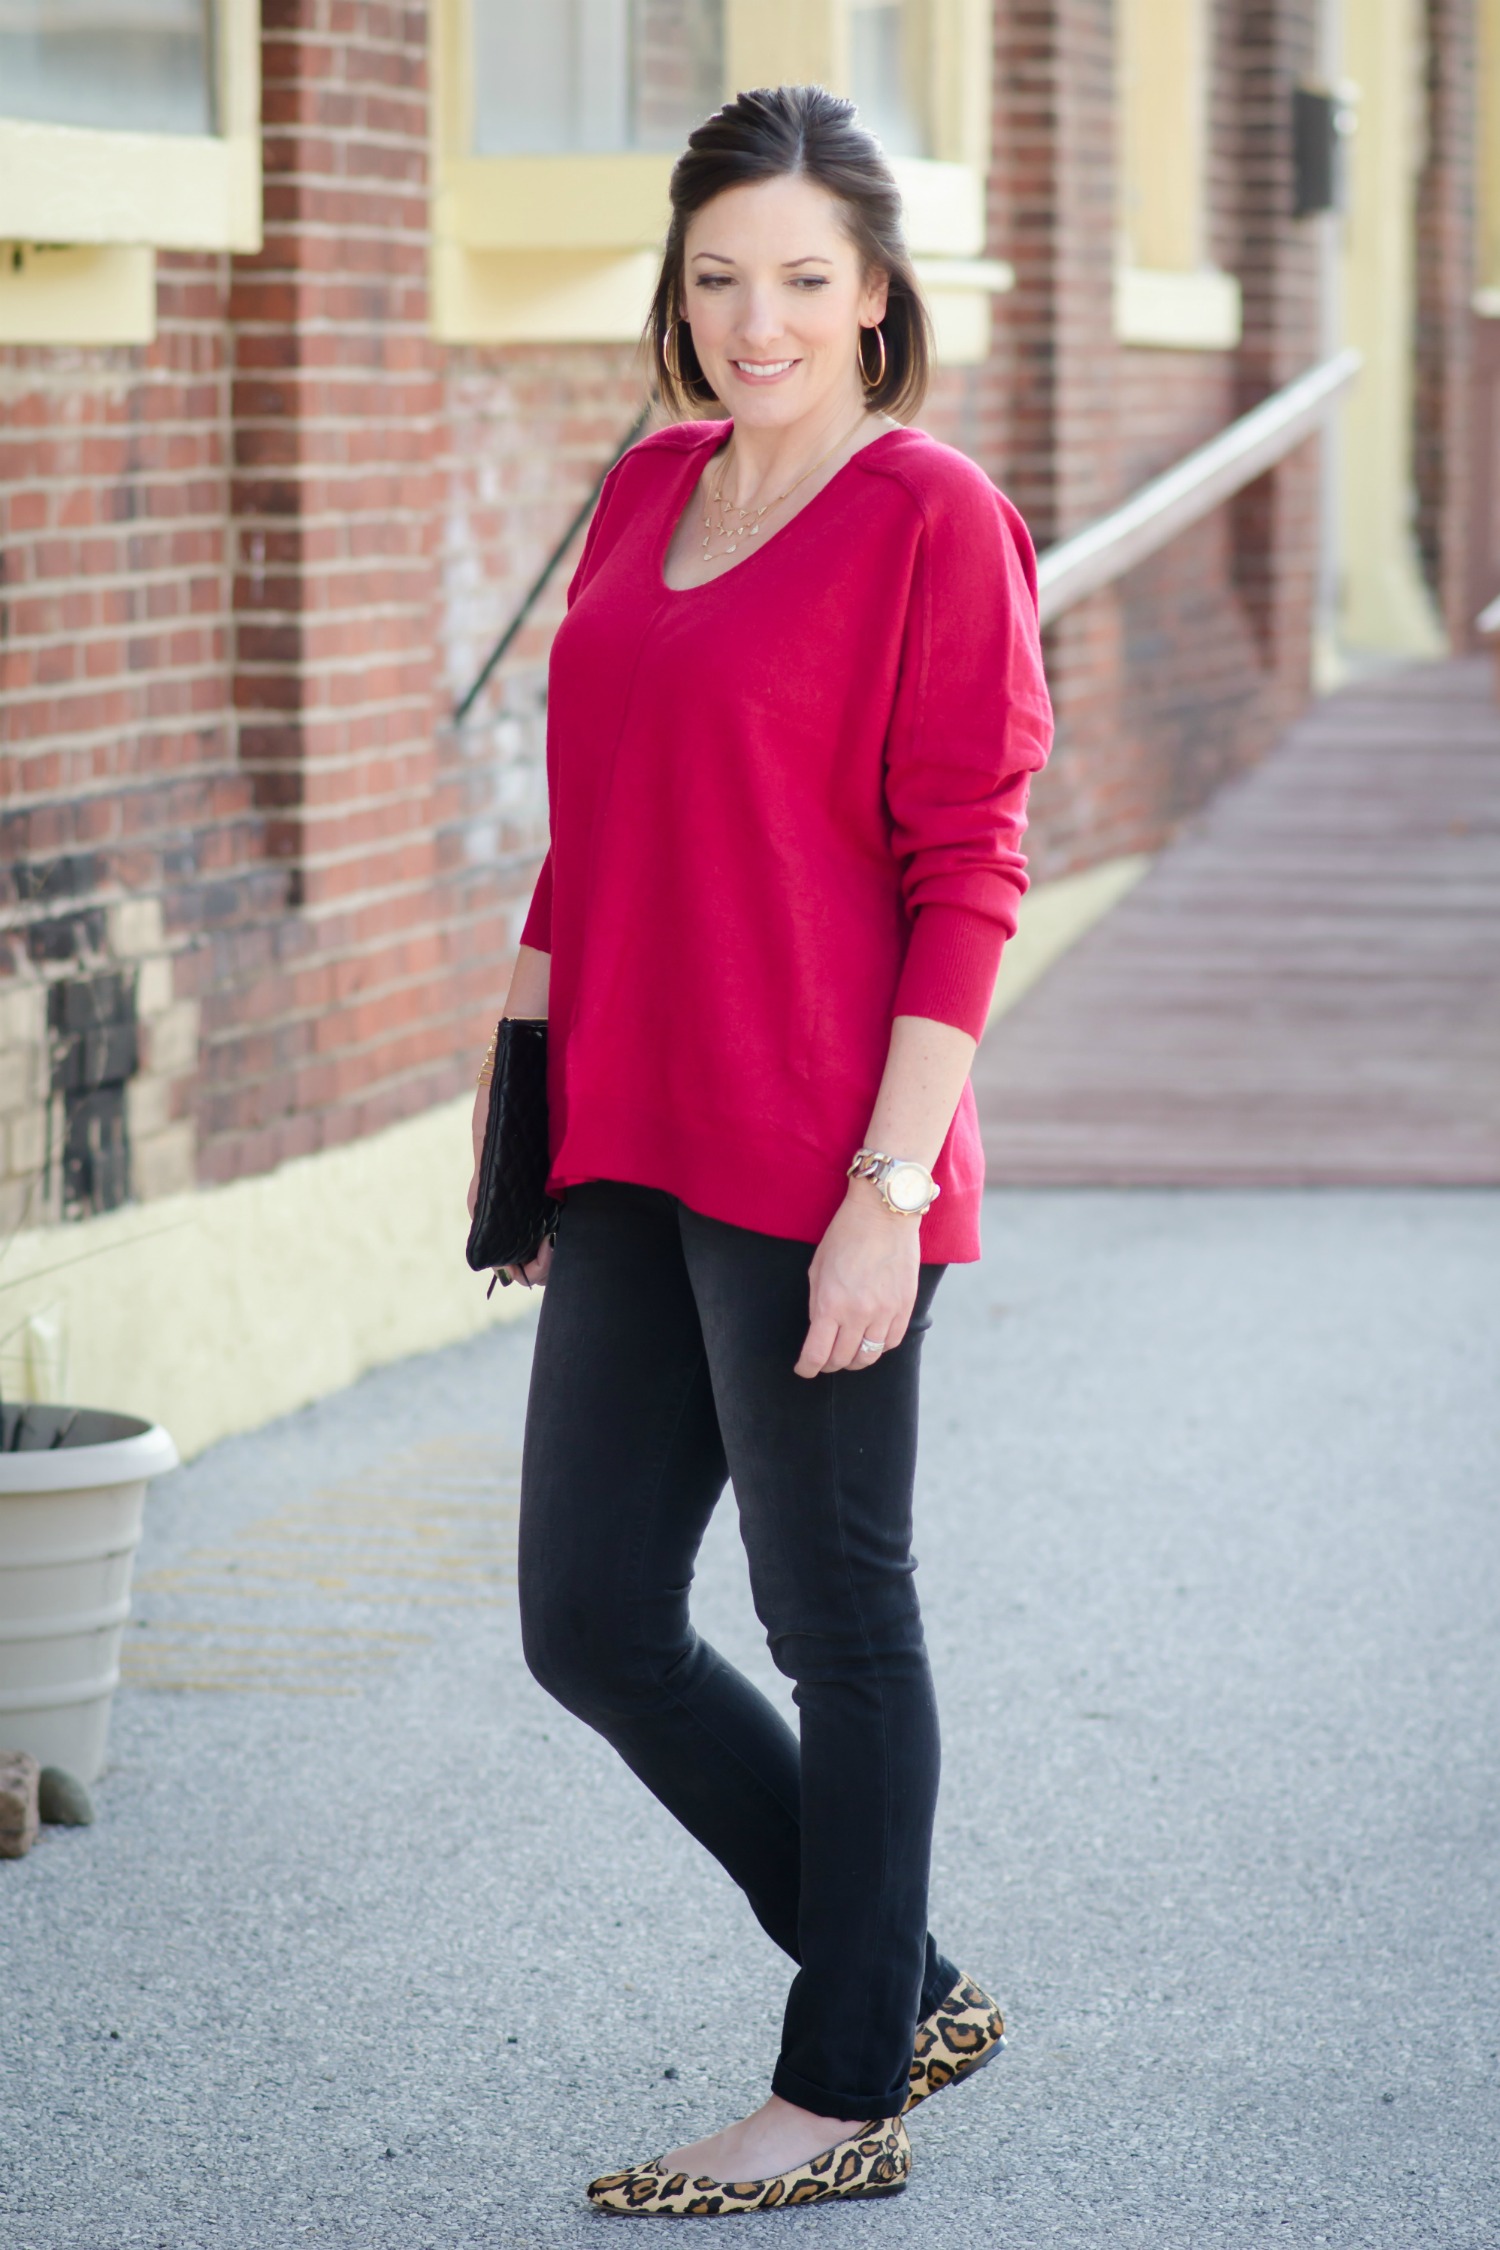 Winter Outfits for Moms: Oversized Red Sweater with Black Jeans and Leopard Flats or Leopard Pumps